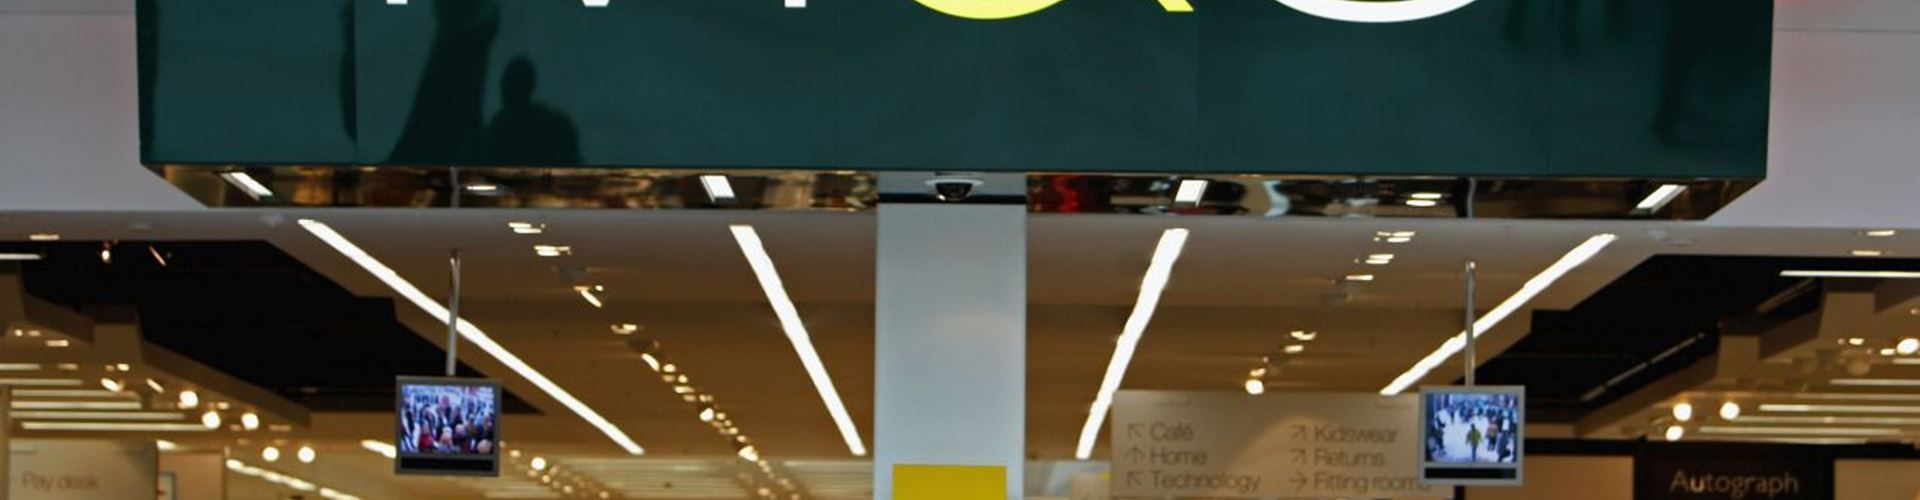 M&S branches out to Nordic countries